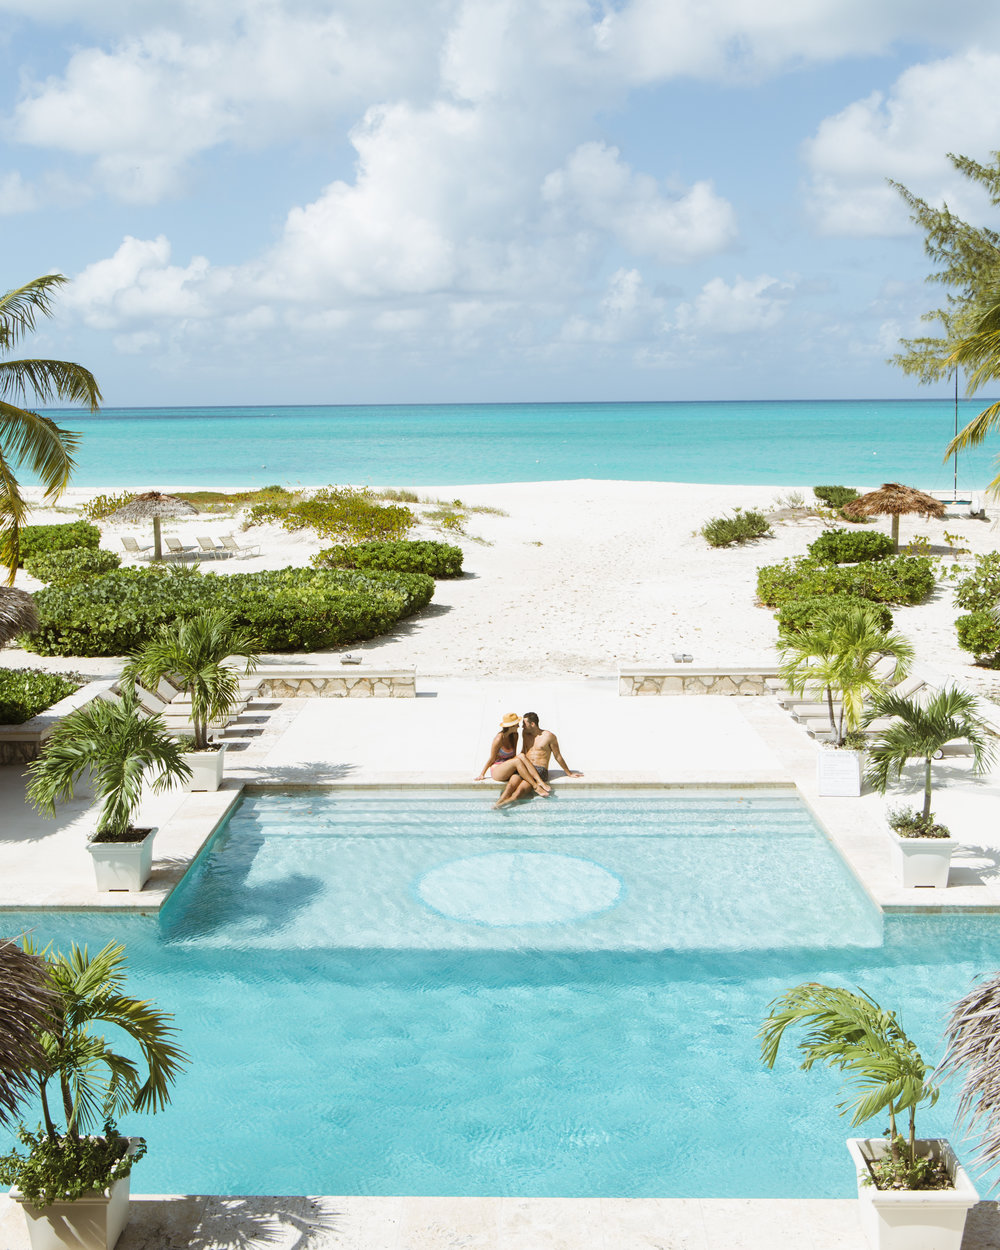 The Best Beach in Turks and Caicos